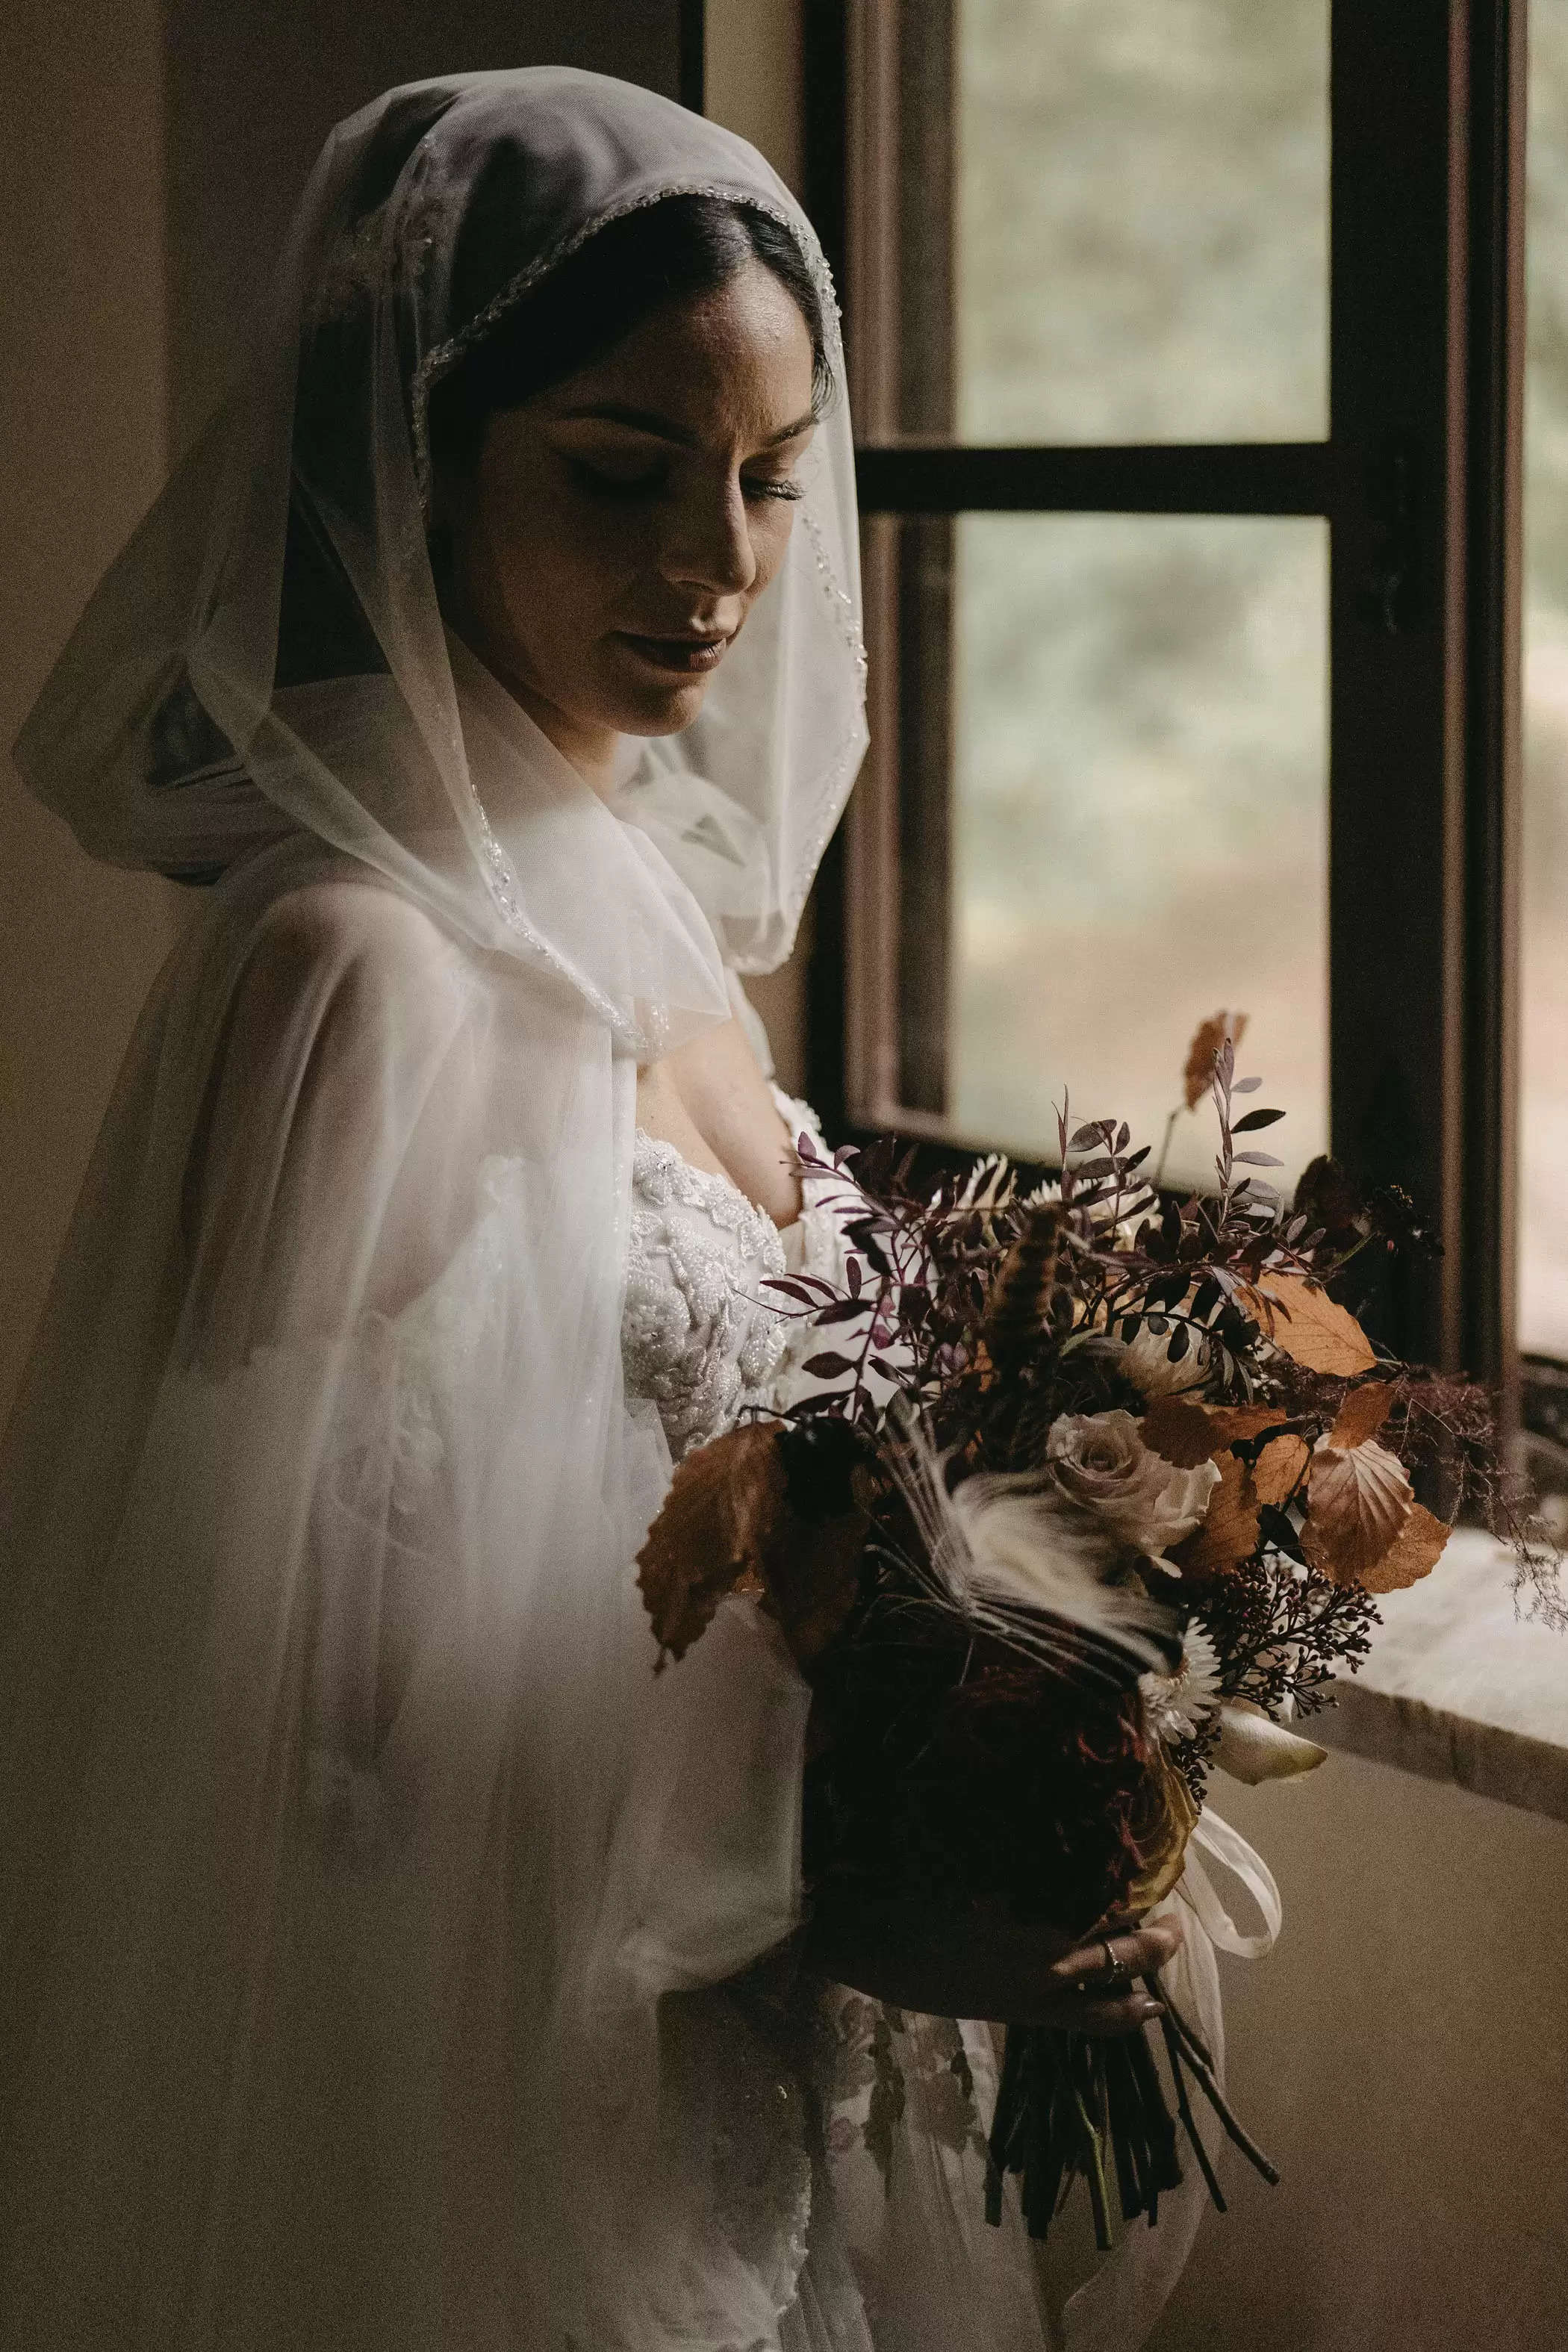 An Enchanted Autumnal Wedding ceremony in Sicily